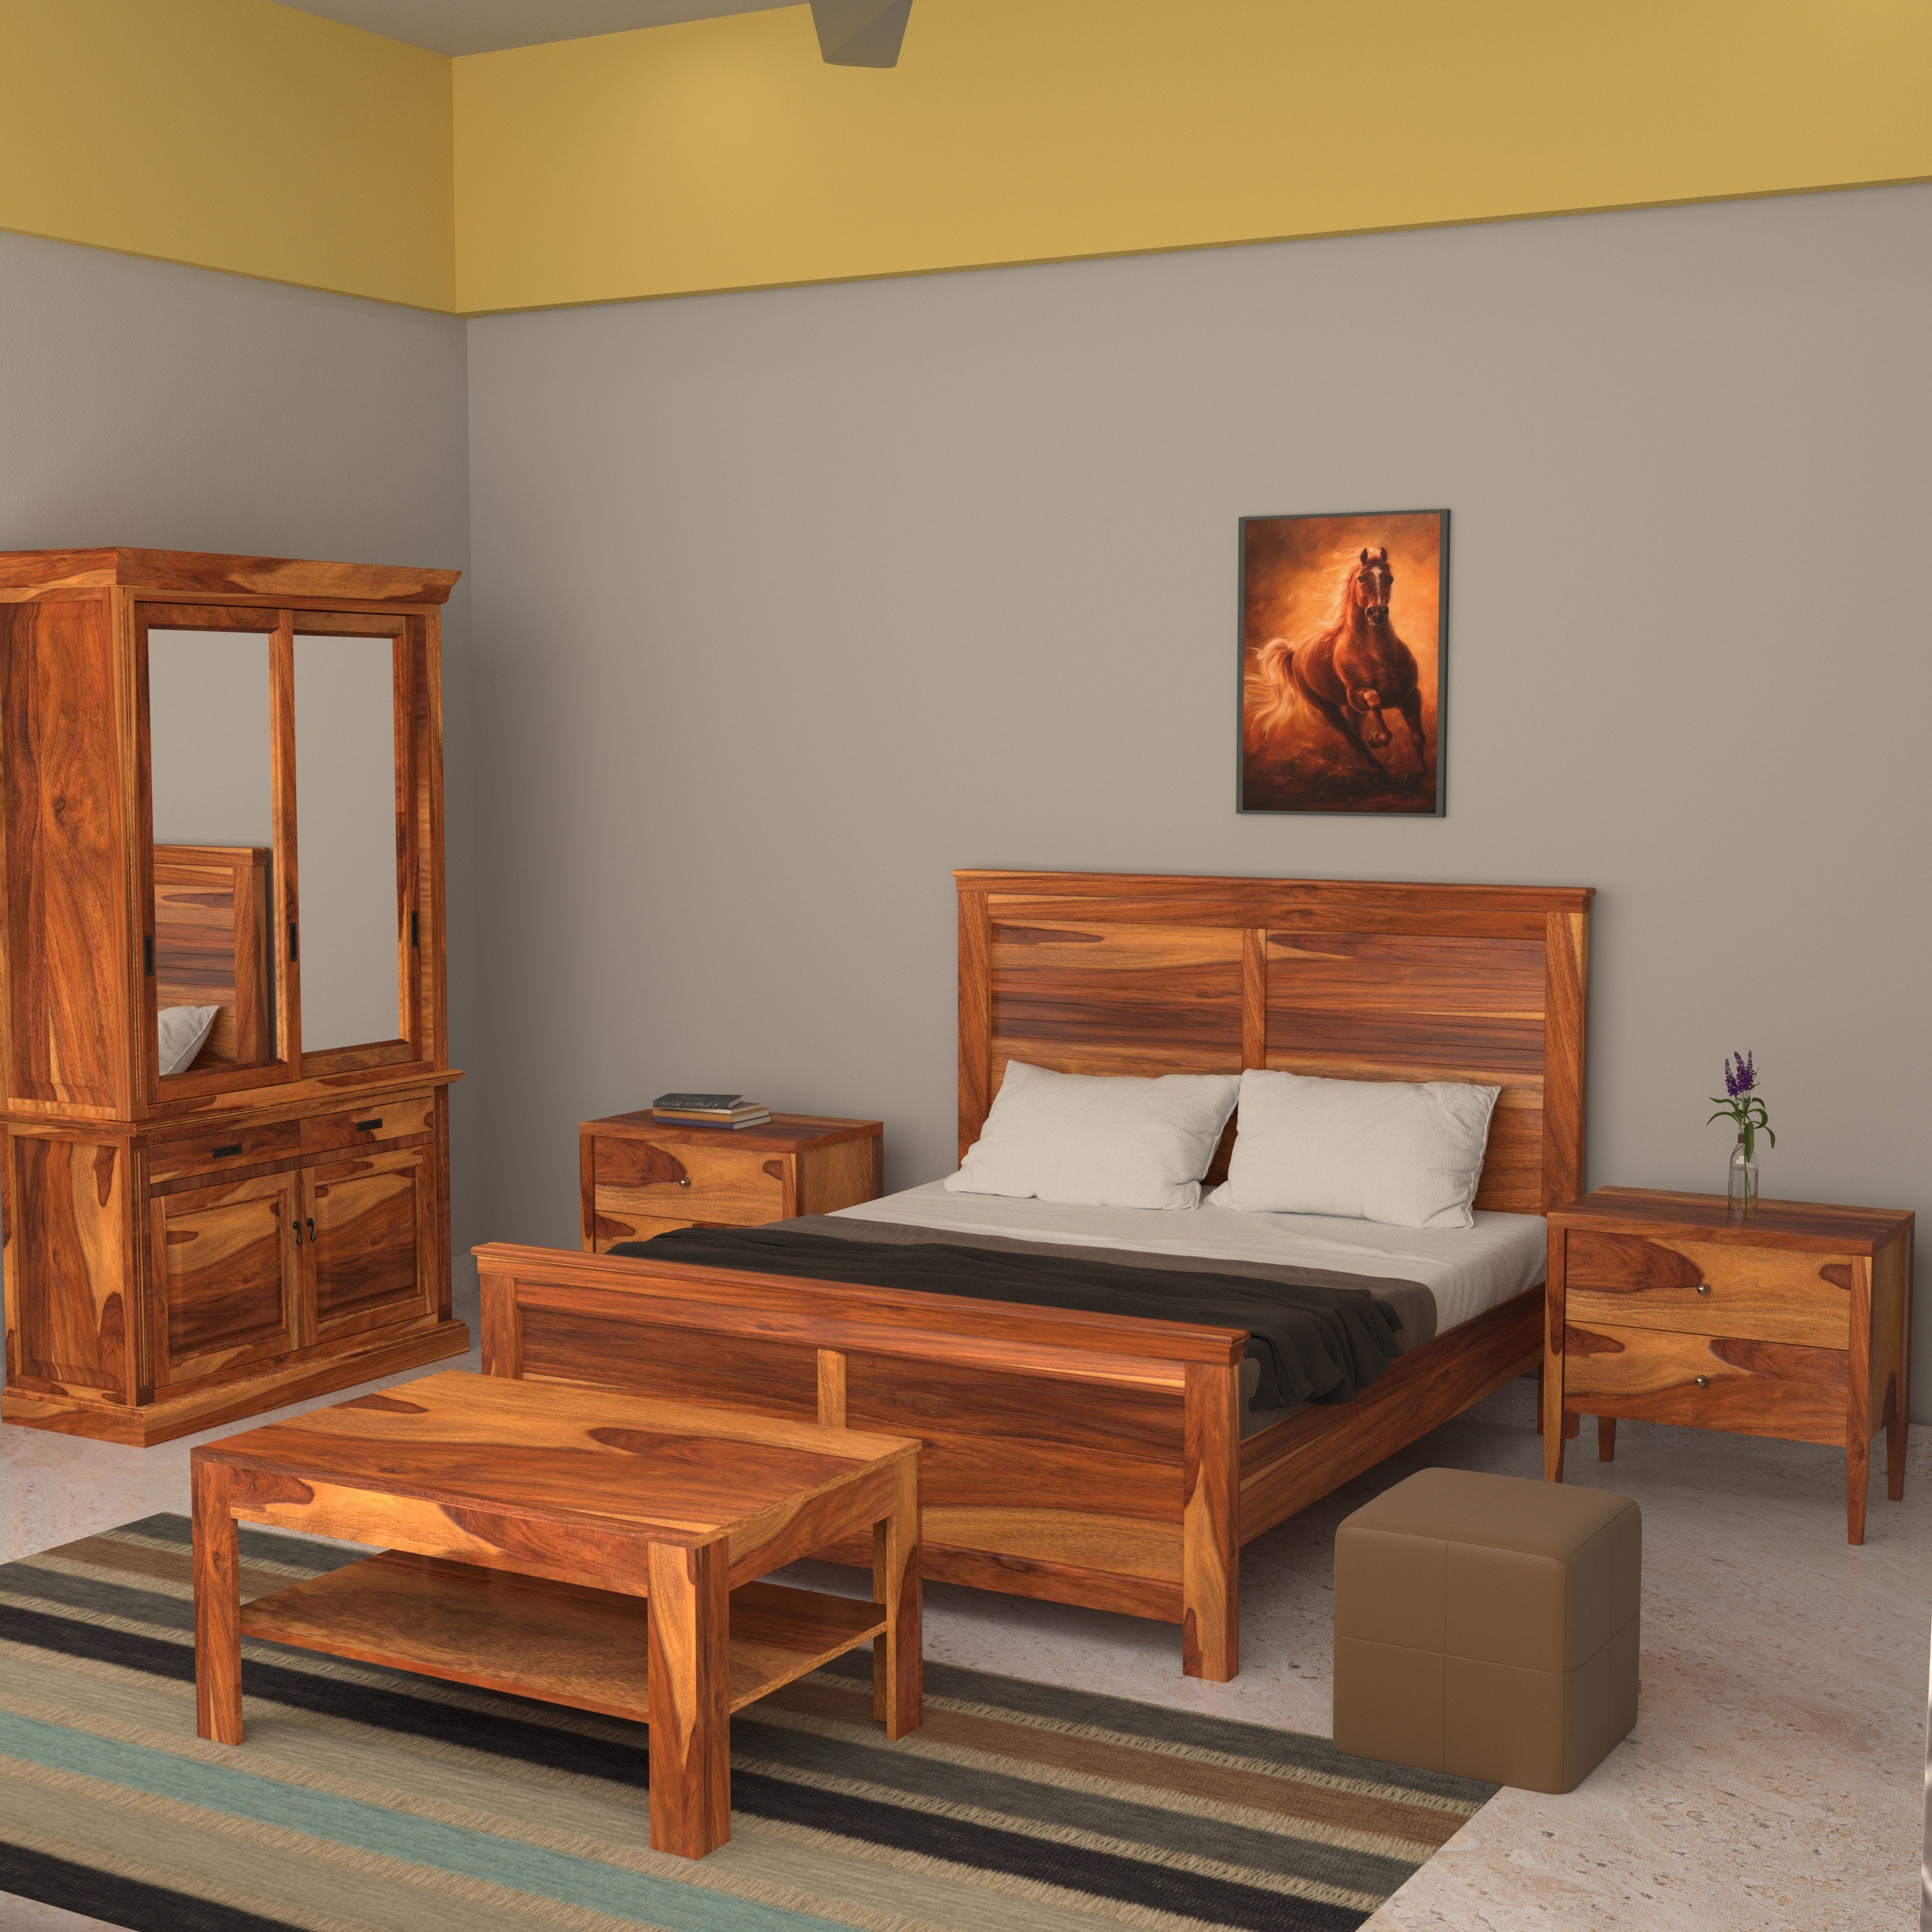 Classic Indian Vintage Style Wooden Handmade Bed with Complete Bedroom Set Bedroom Furniture Sets